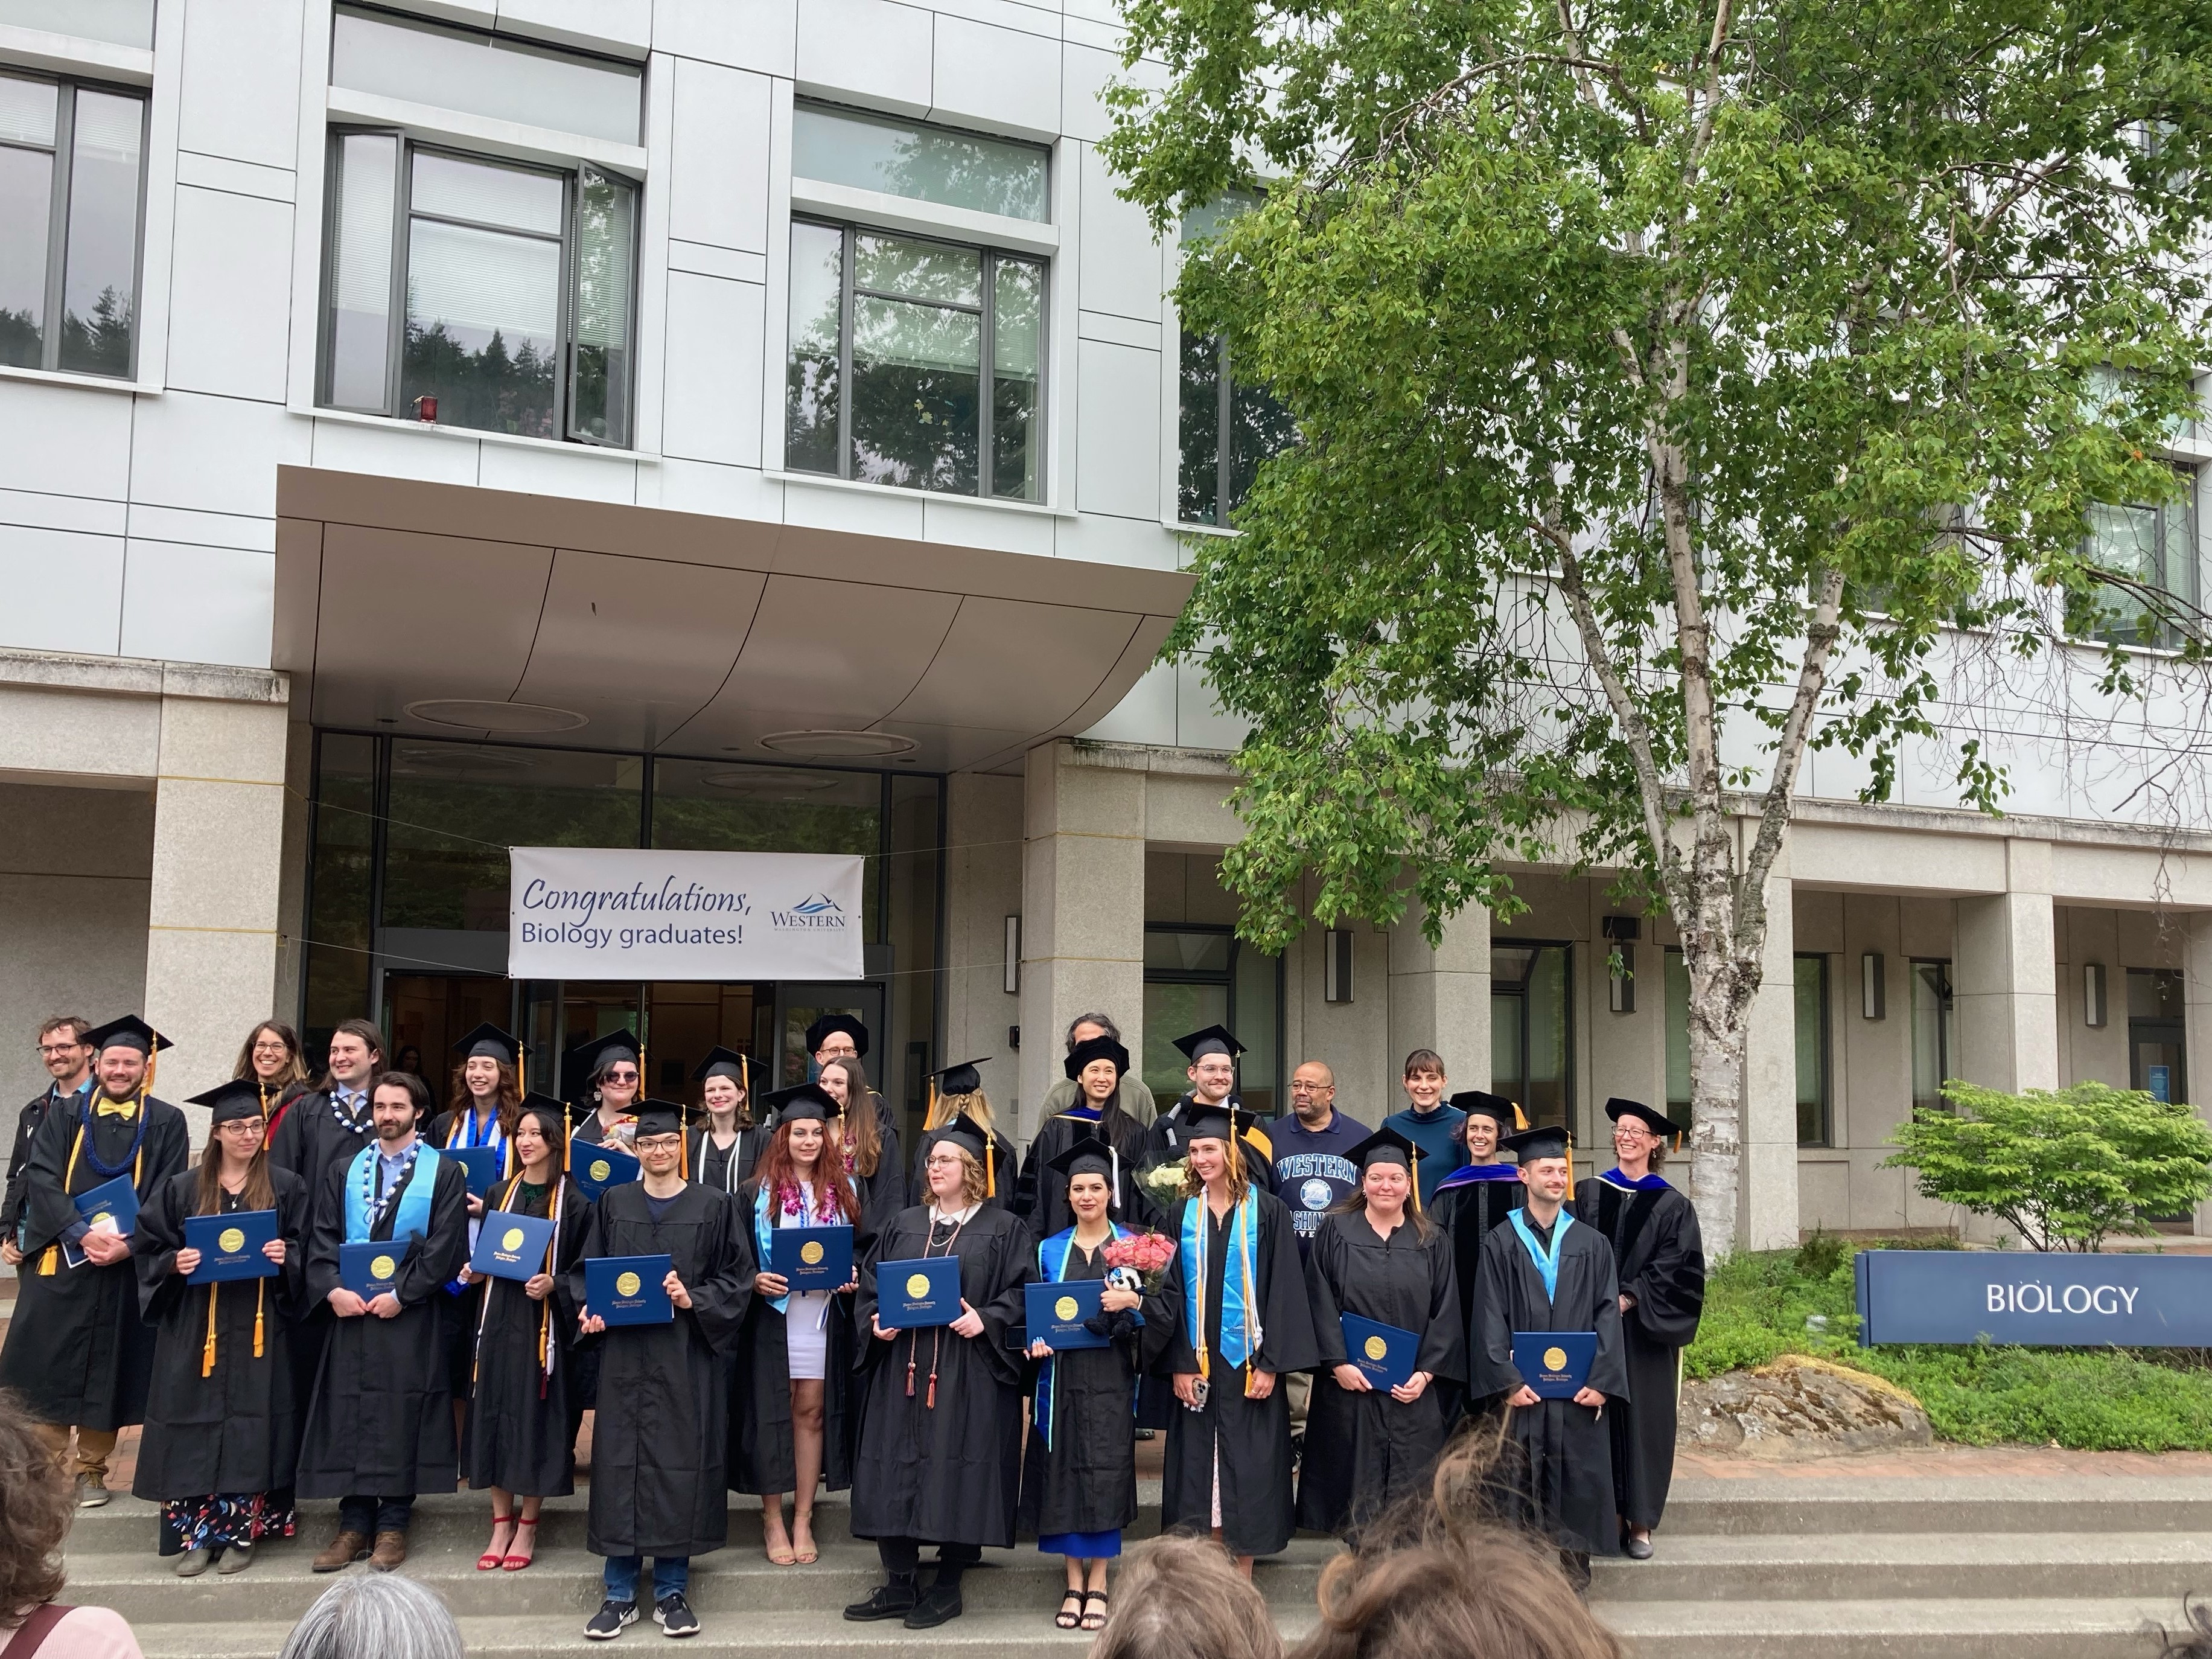 Graduates and faculty in caps and gowns stand in rows on the front steps of the biology building